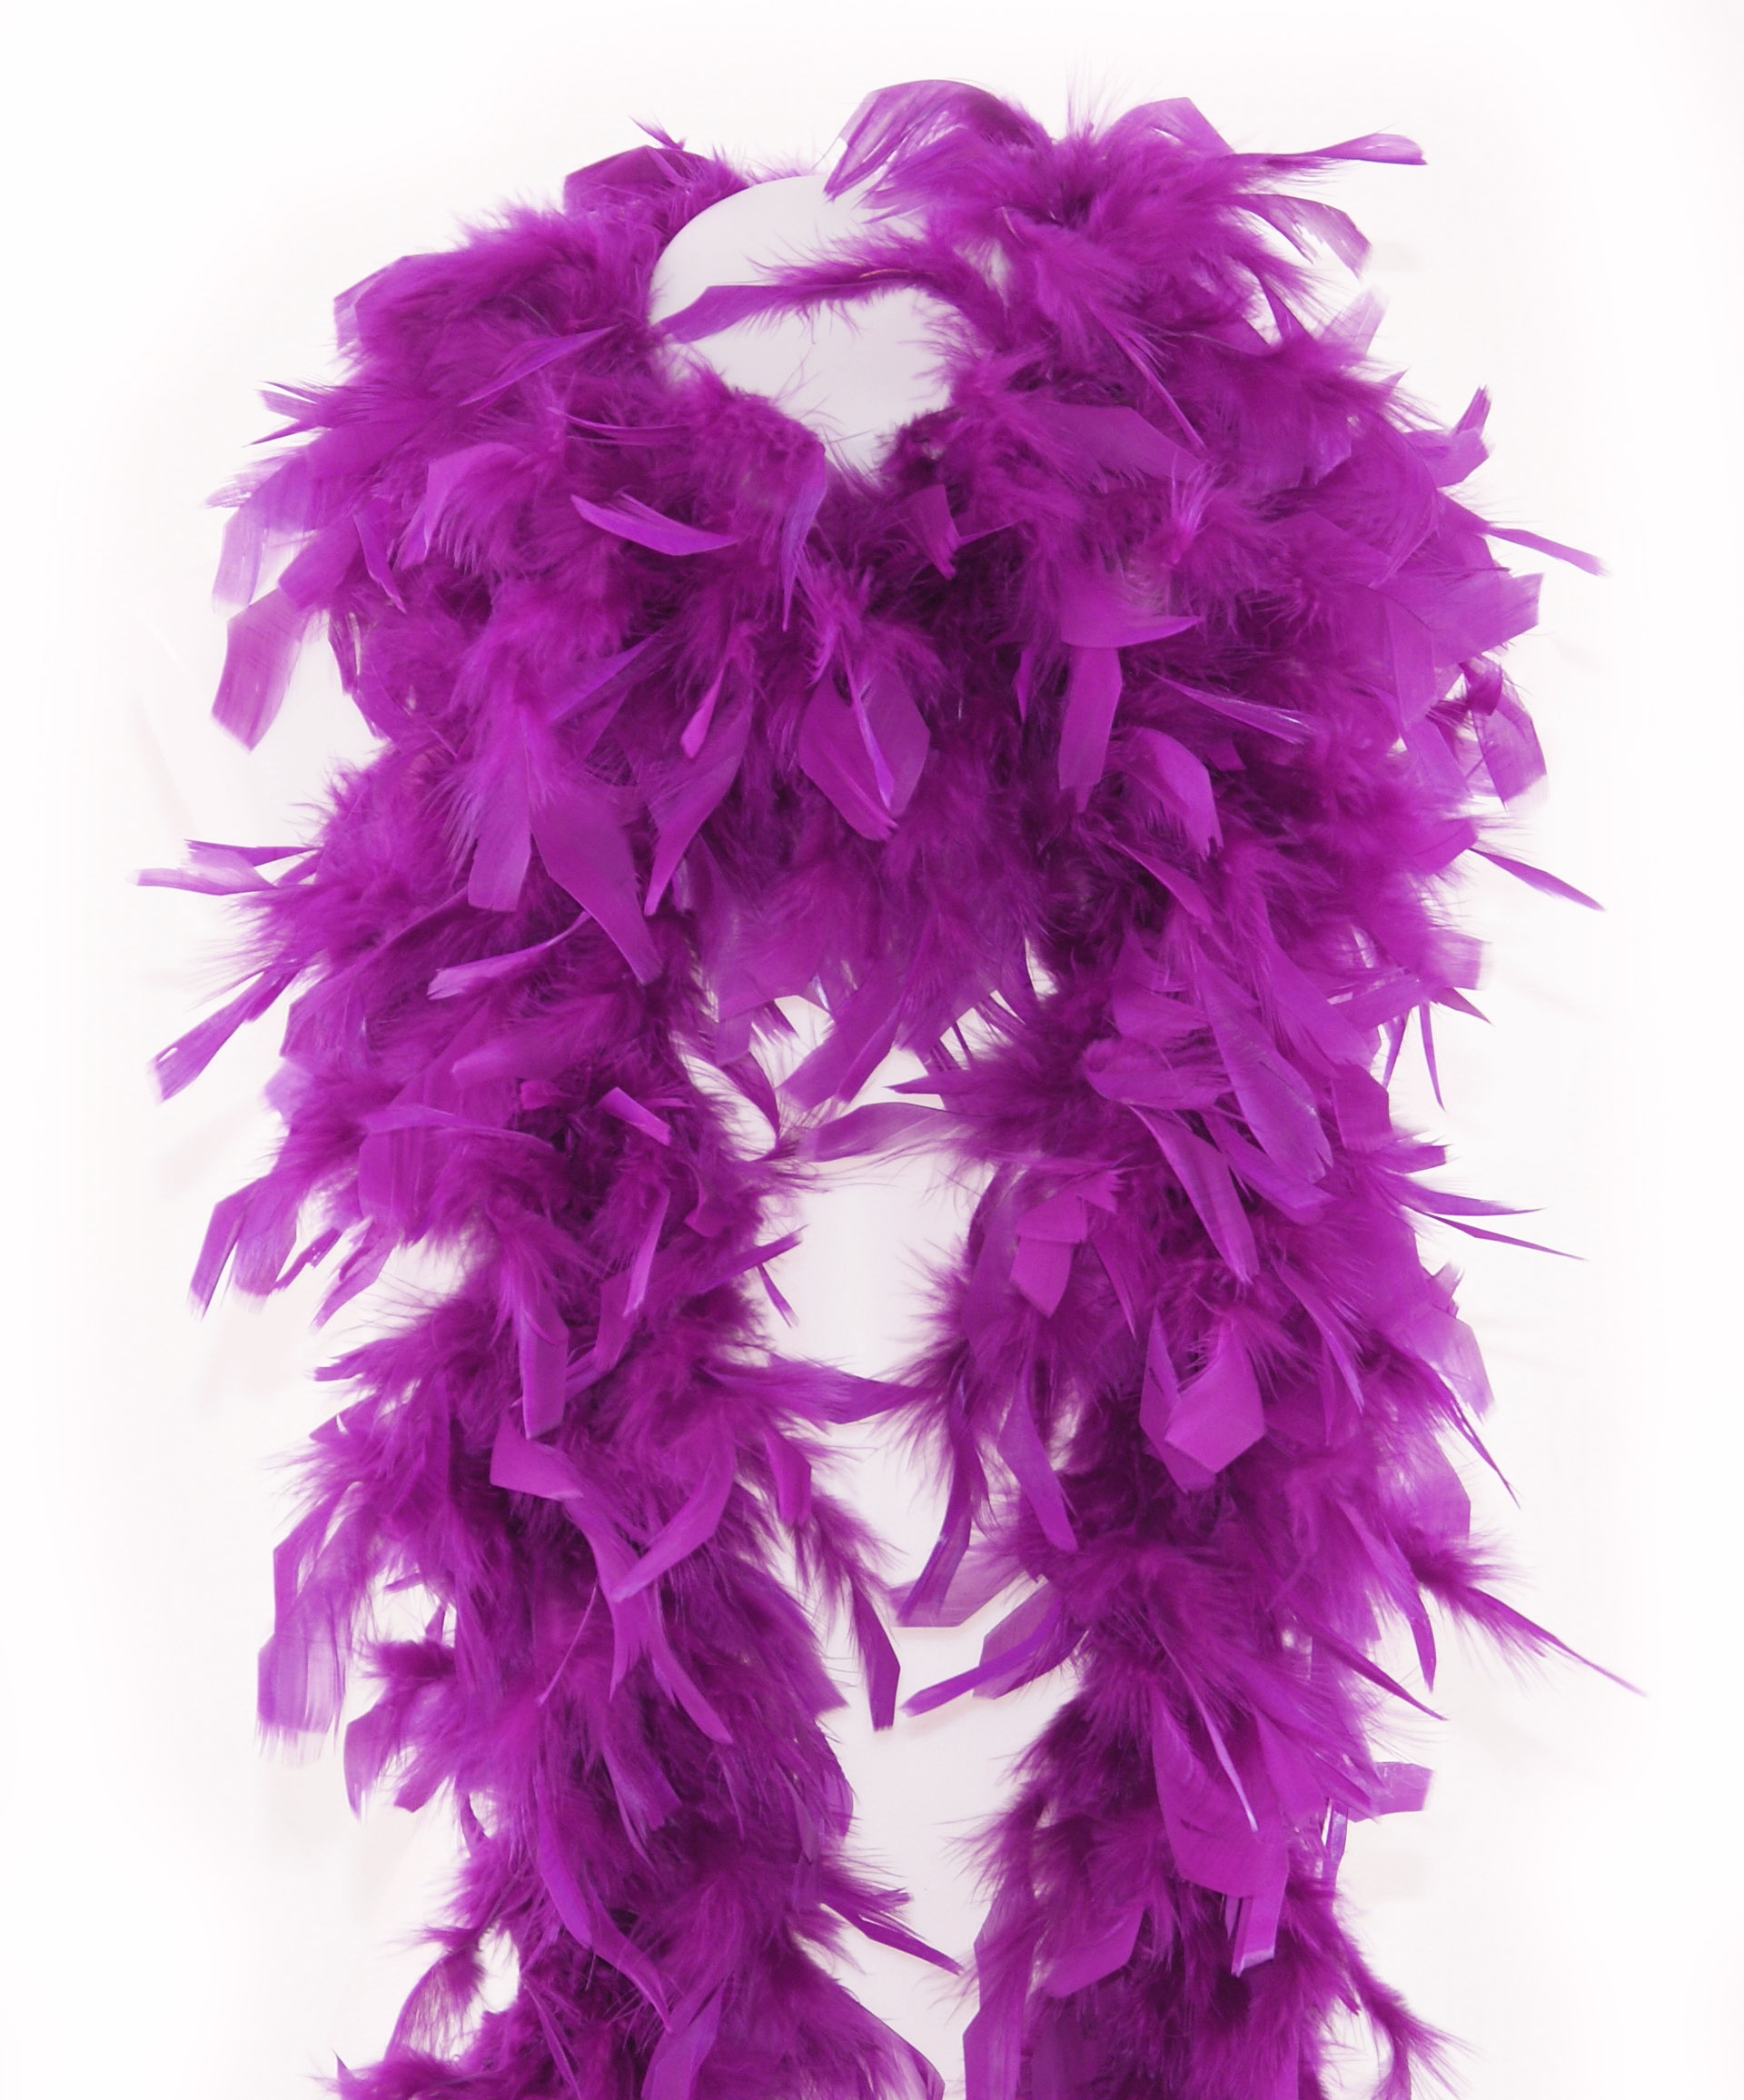 Boa plume dinde chandelle - 2 m - teintes rose - Plume Marcy